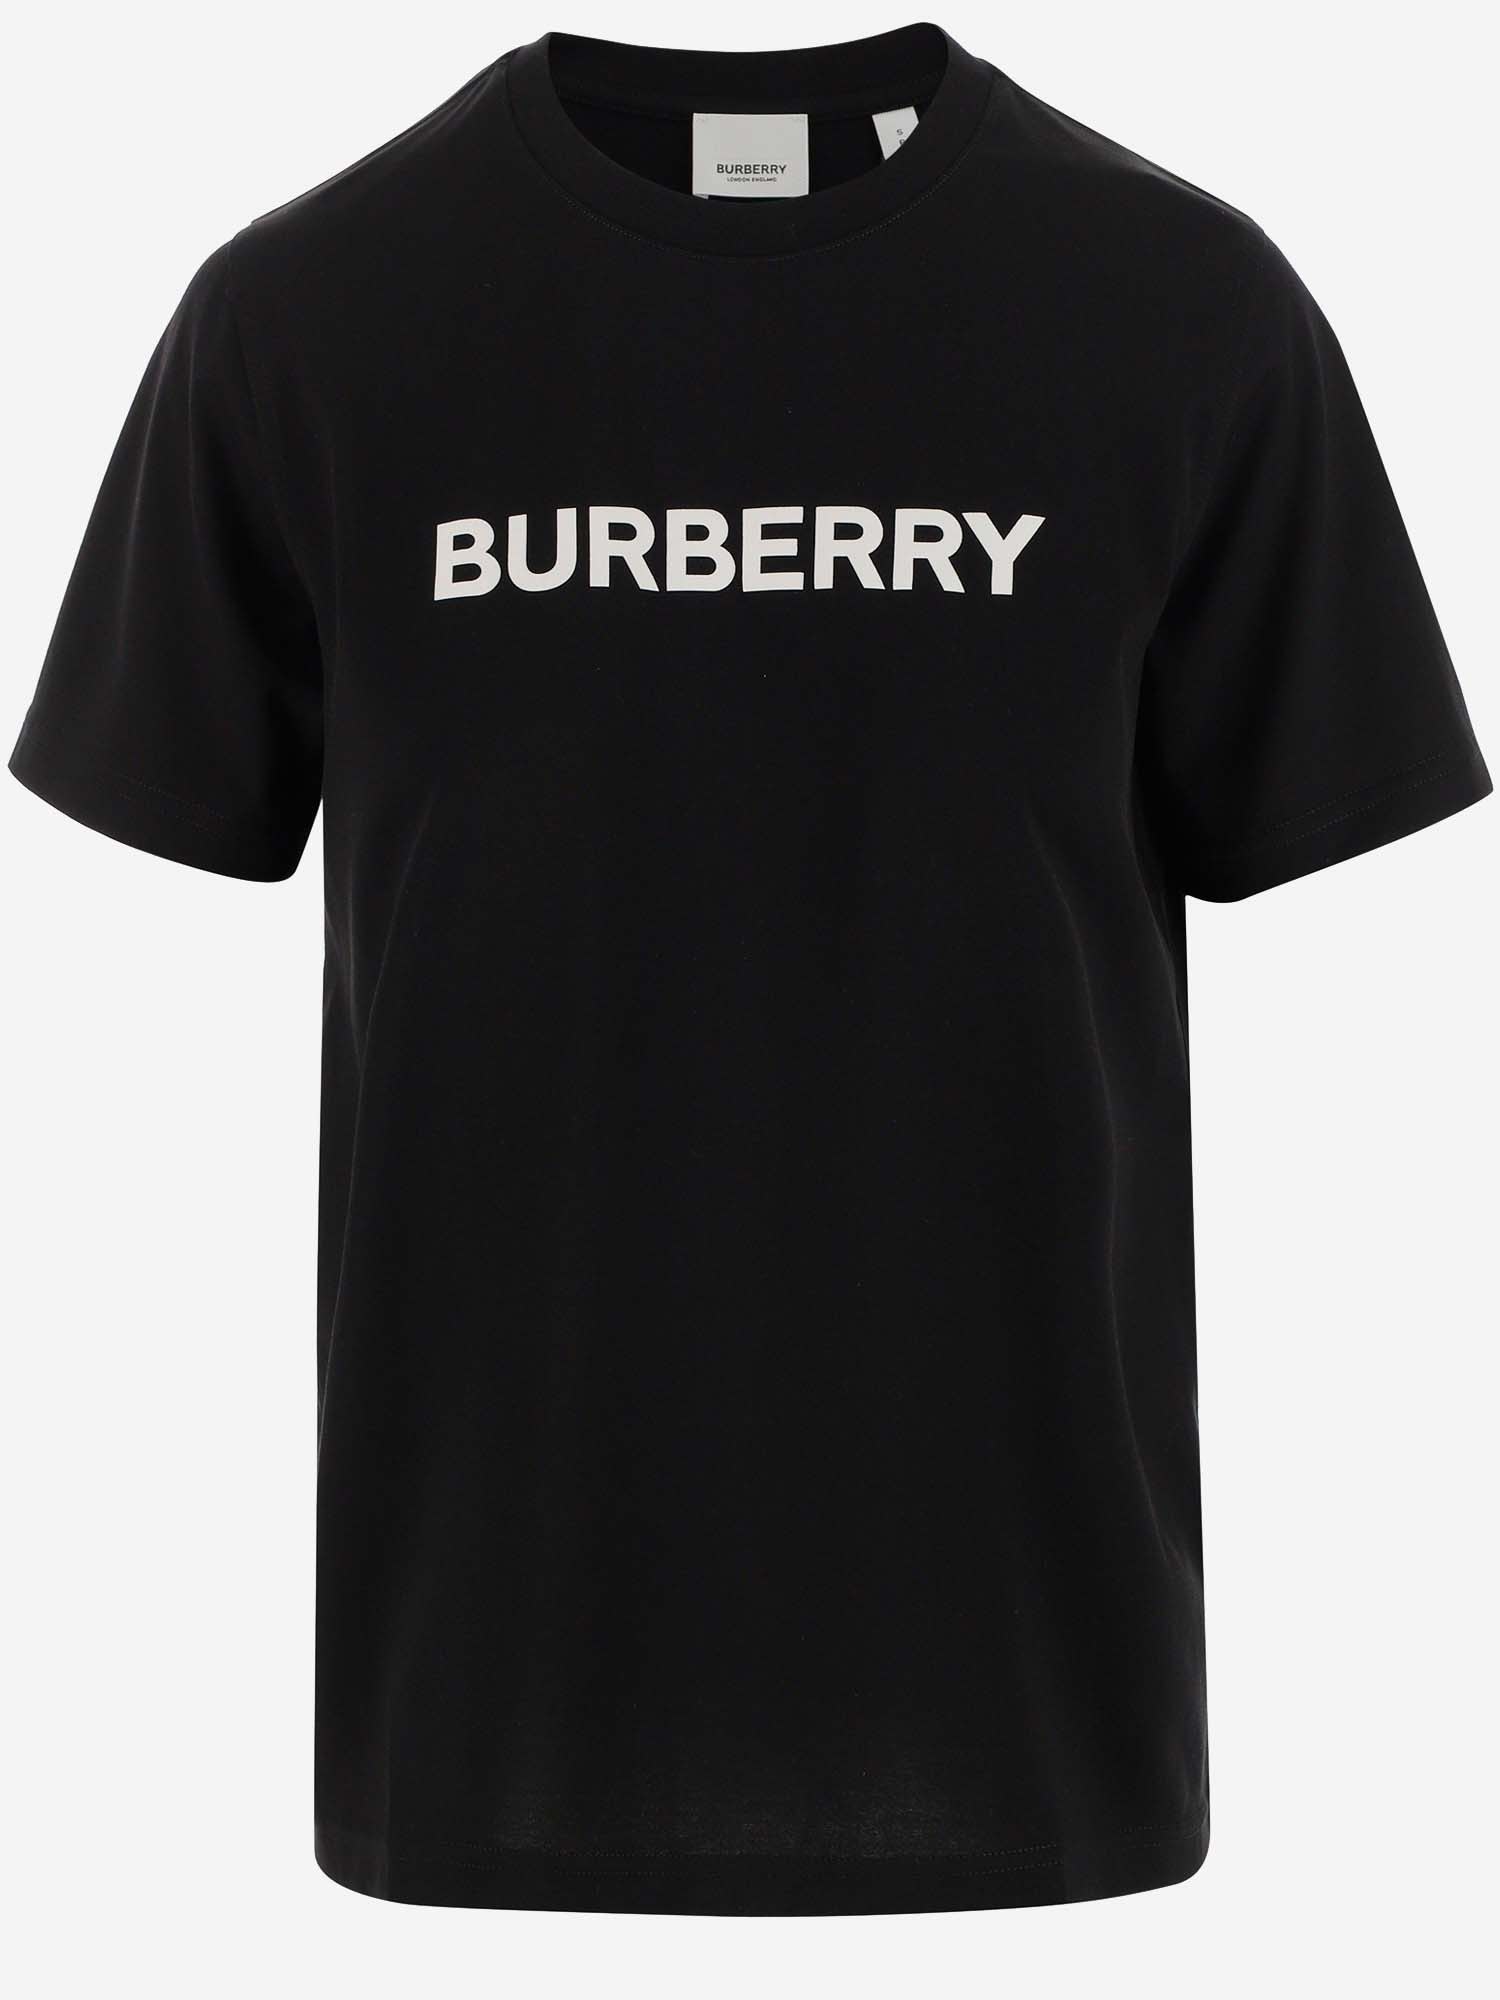 BURBERRY COTTON T-SHIRT WITH LOGO